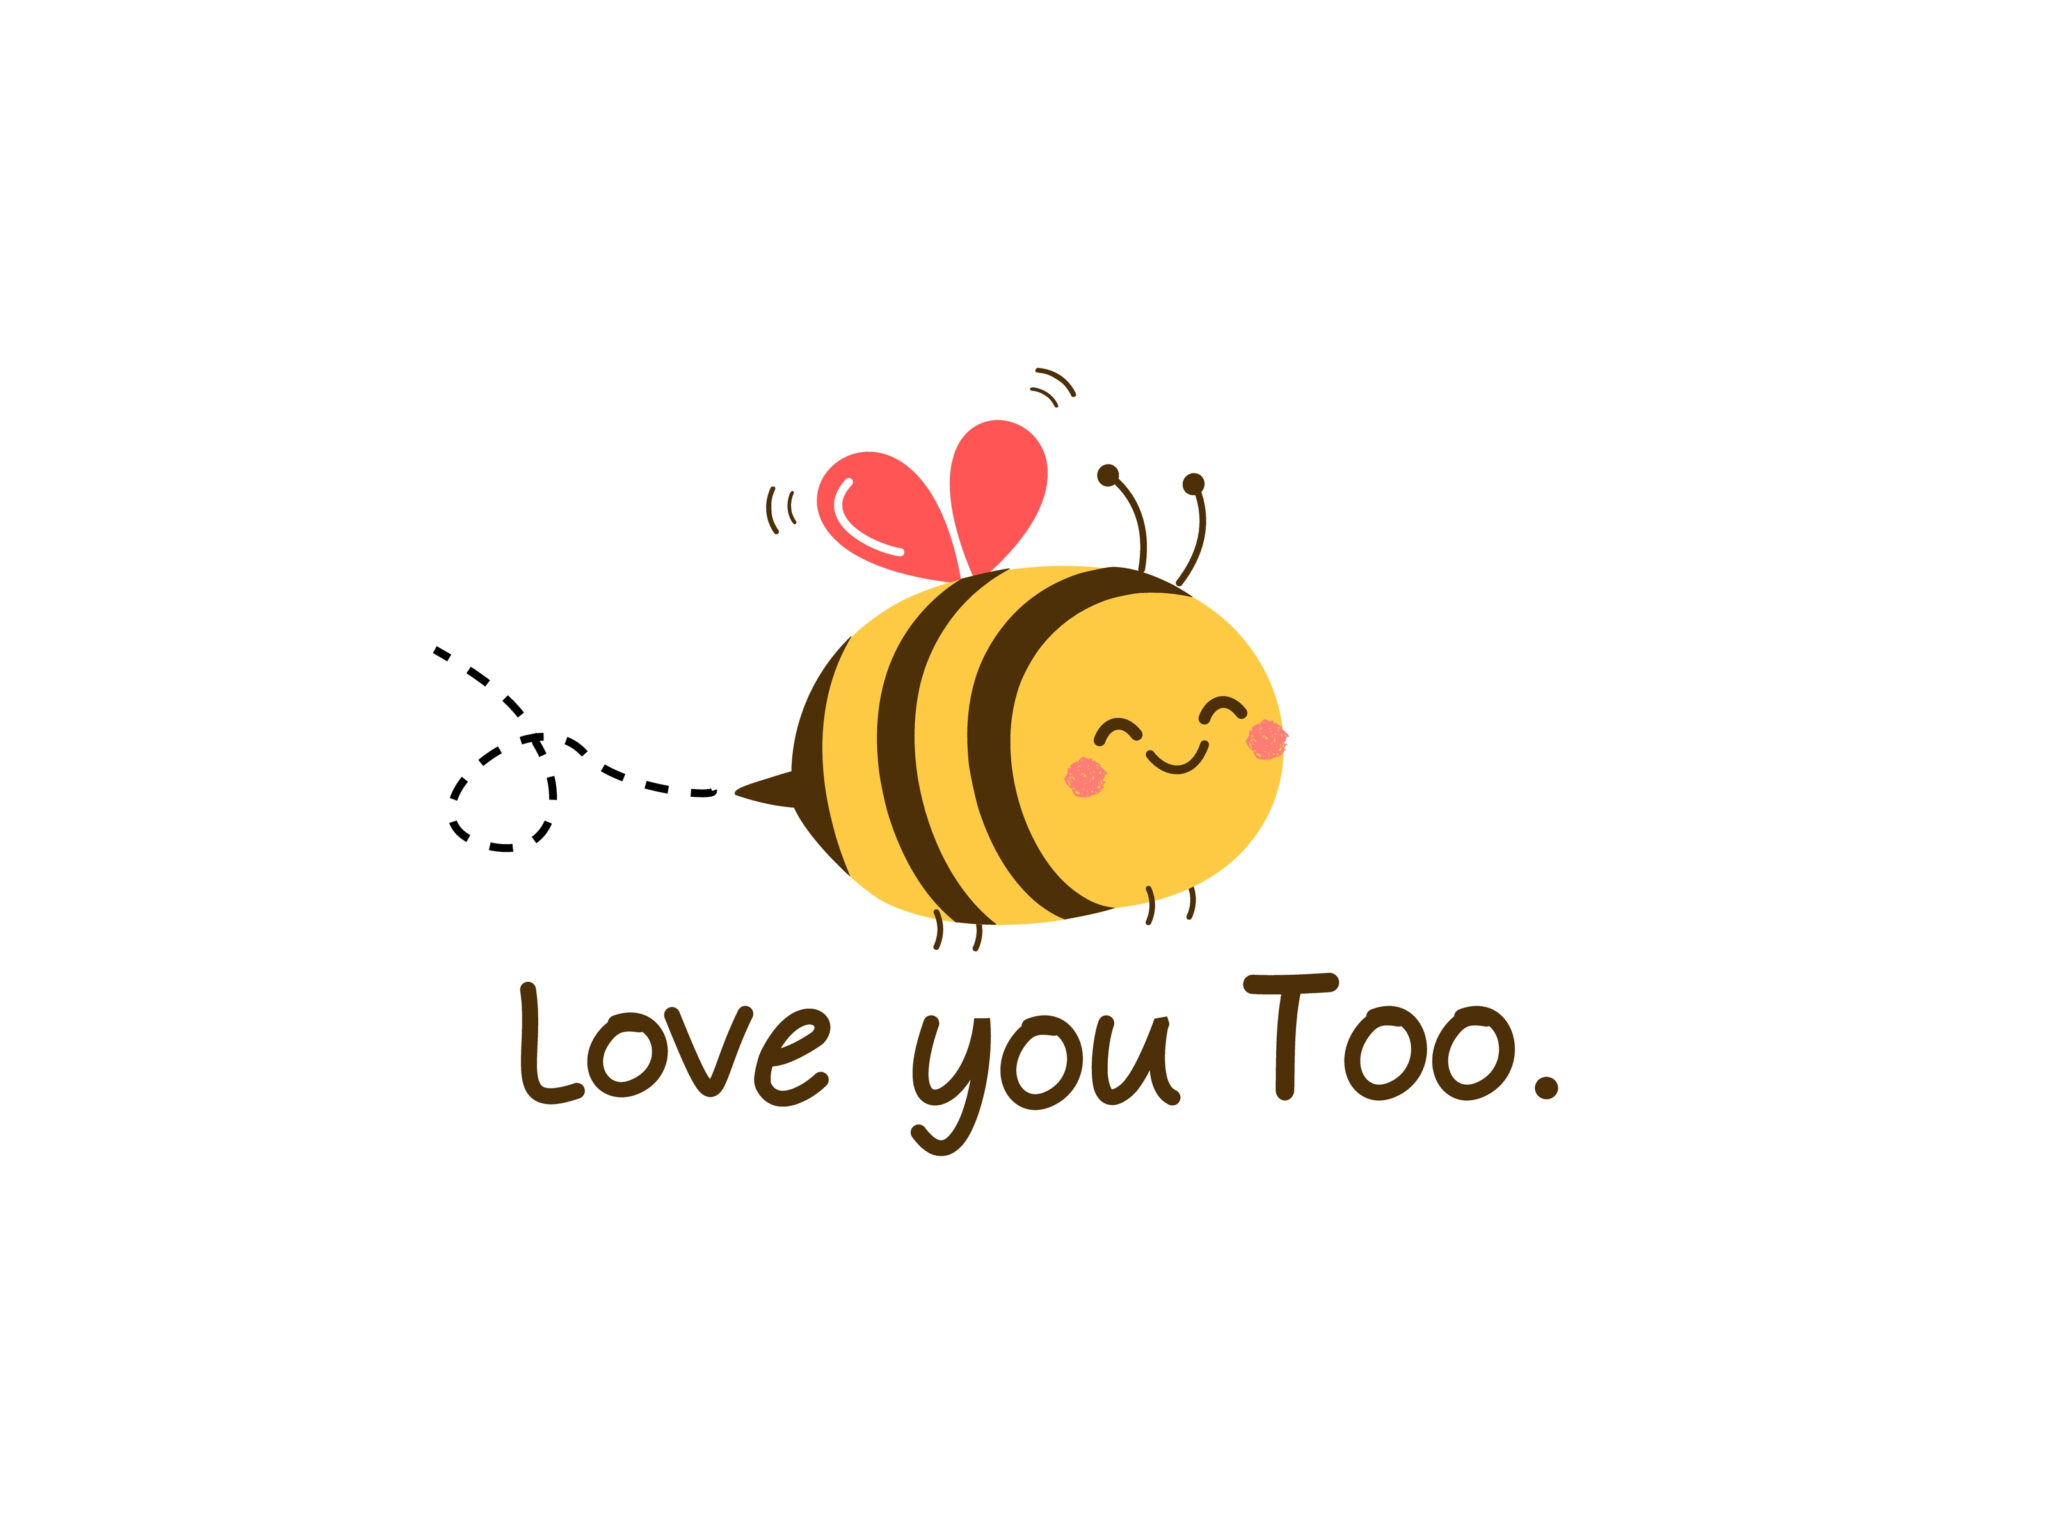 Be the Bees Best Friend!